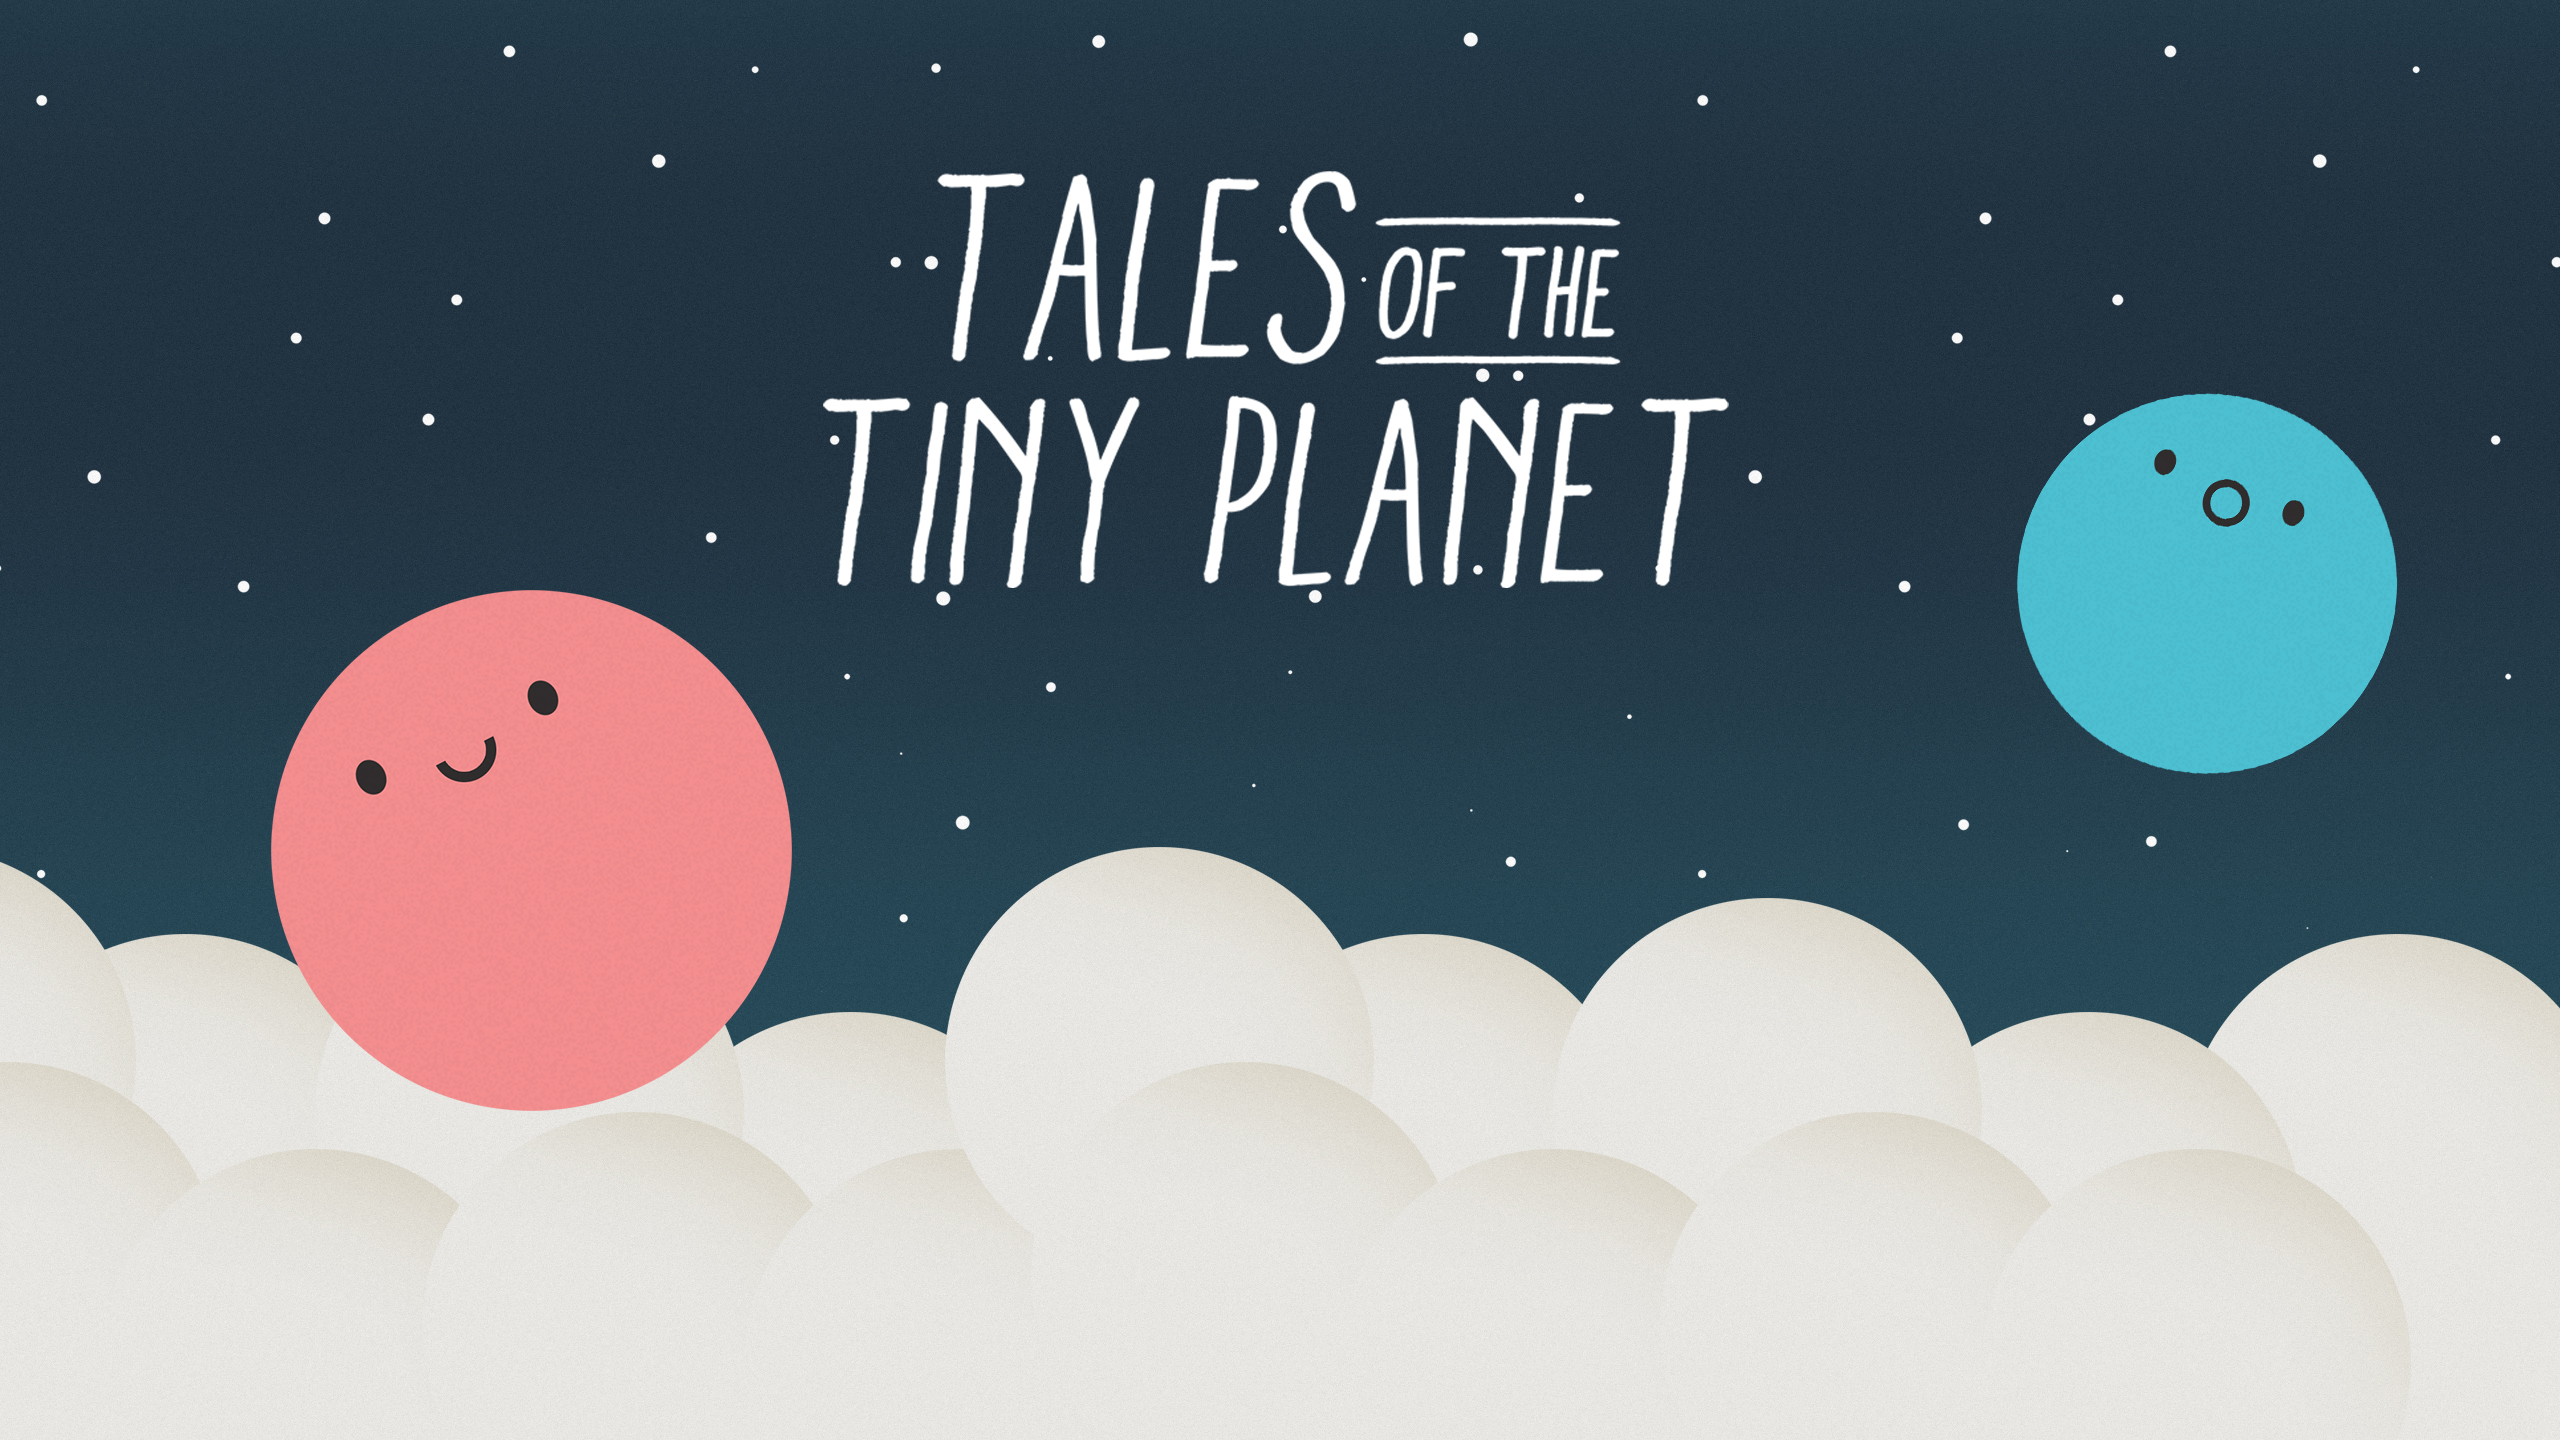 Tales of the Tiny Planet Achievements